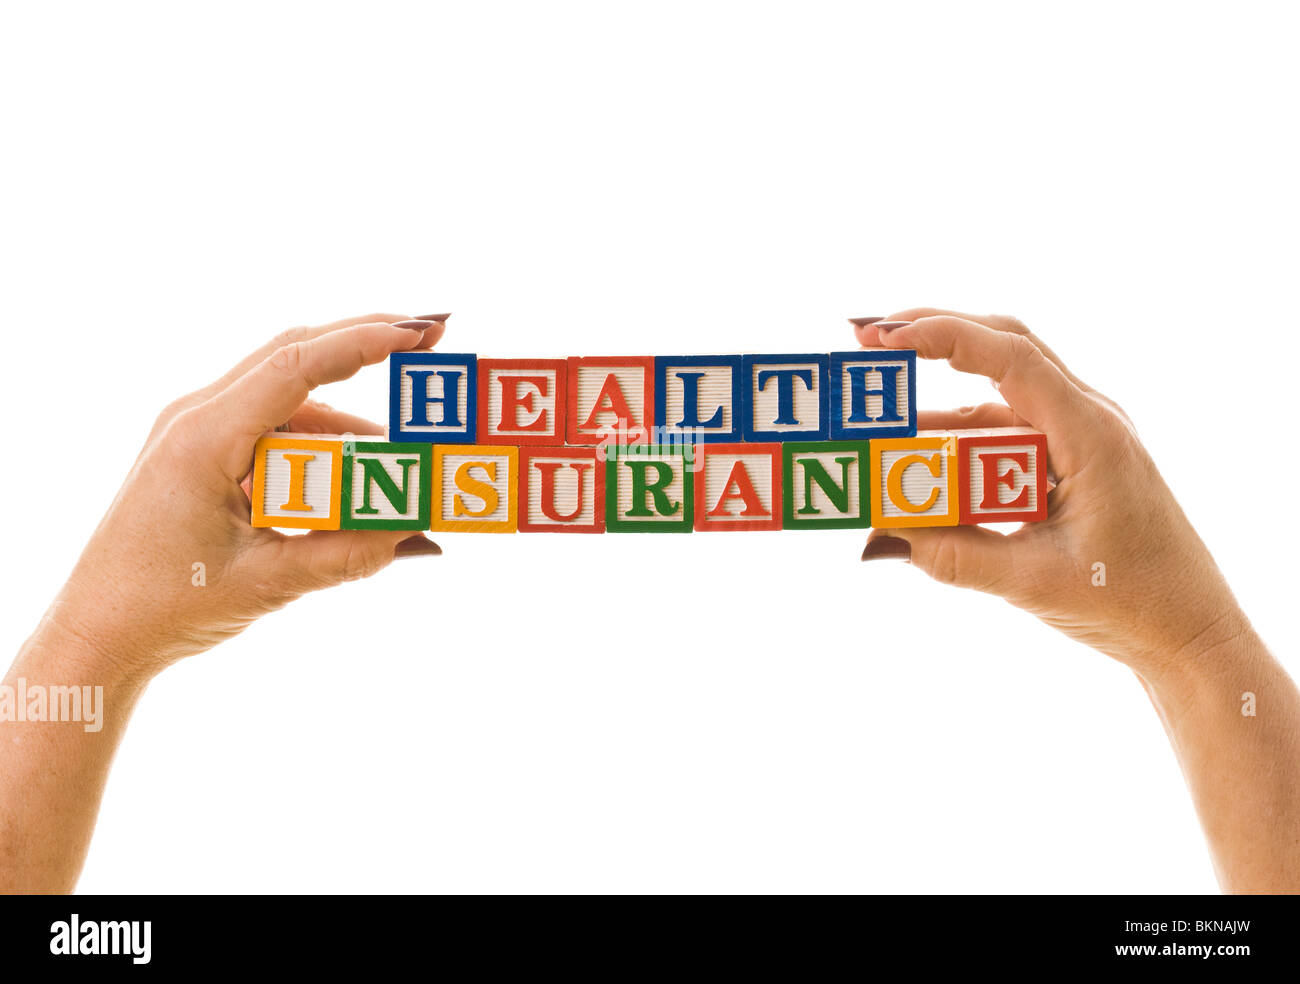 Getting your hands around healthcare. Woman holding children's blocks that spell 'HEALTH INSURANCE'. Stock Photo